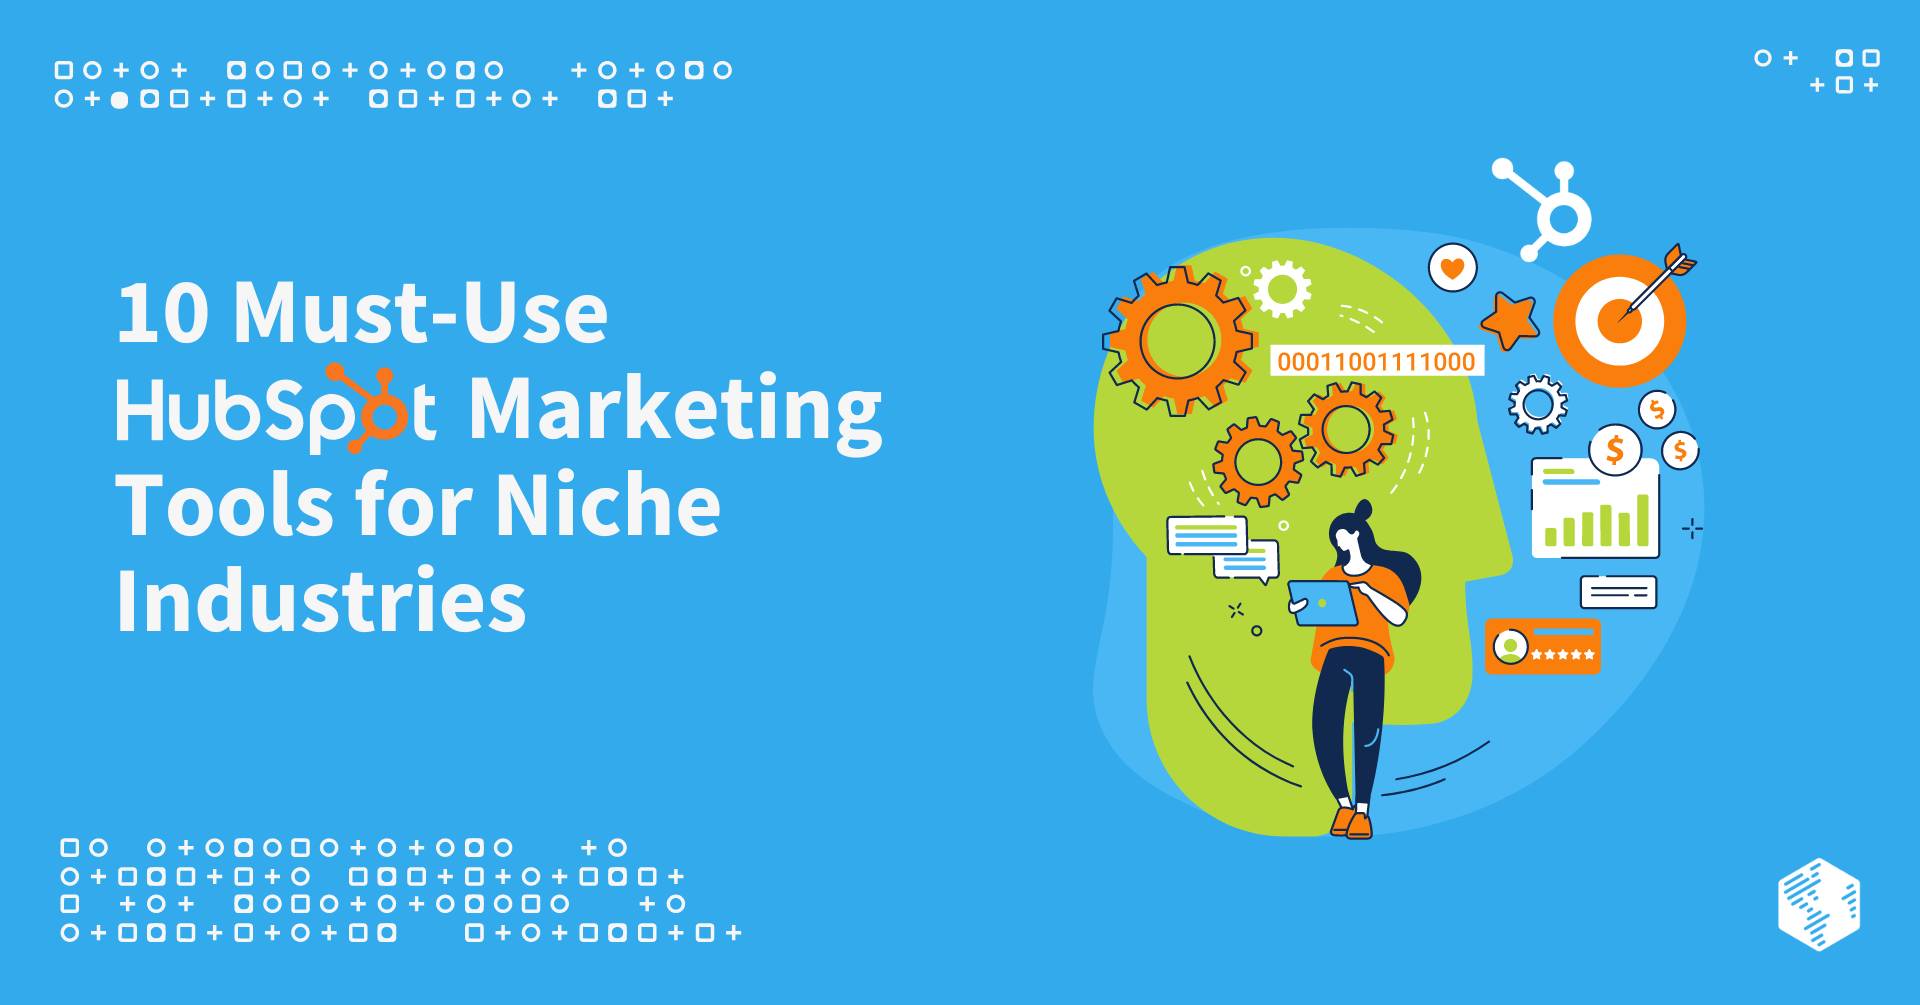 10 Must-Use HubSpot Marketing Tools for Niche Industries